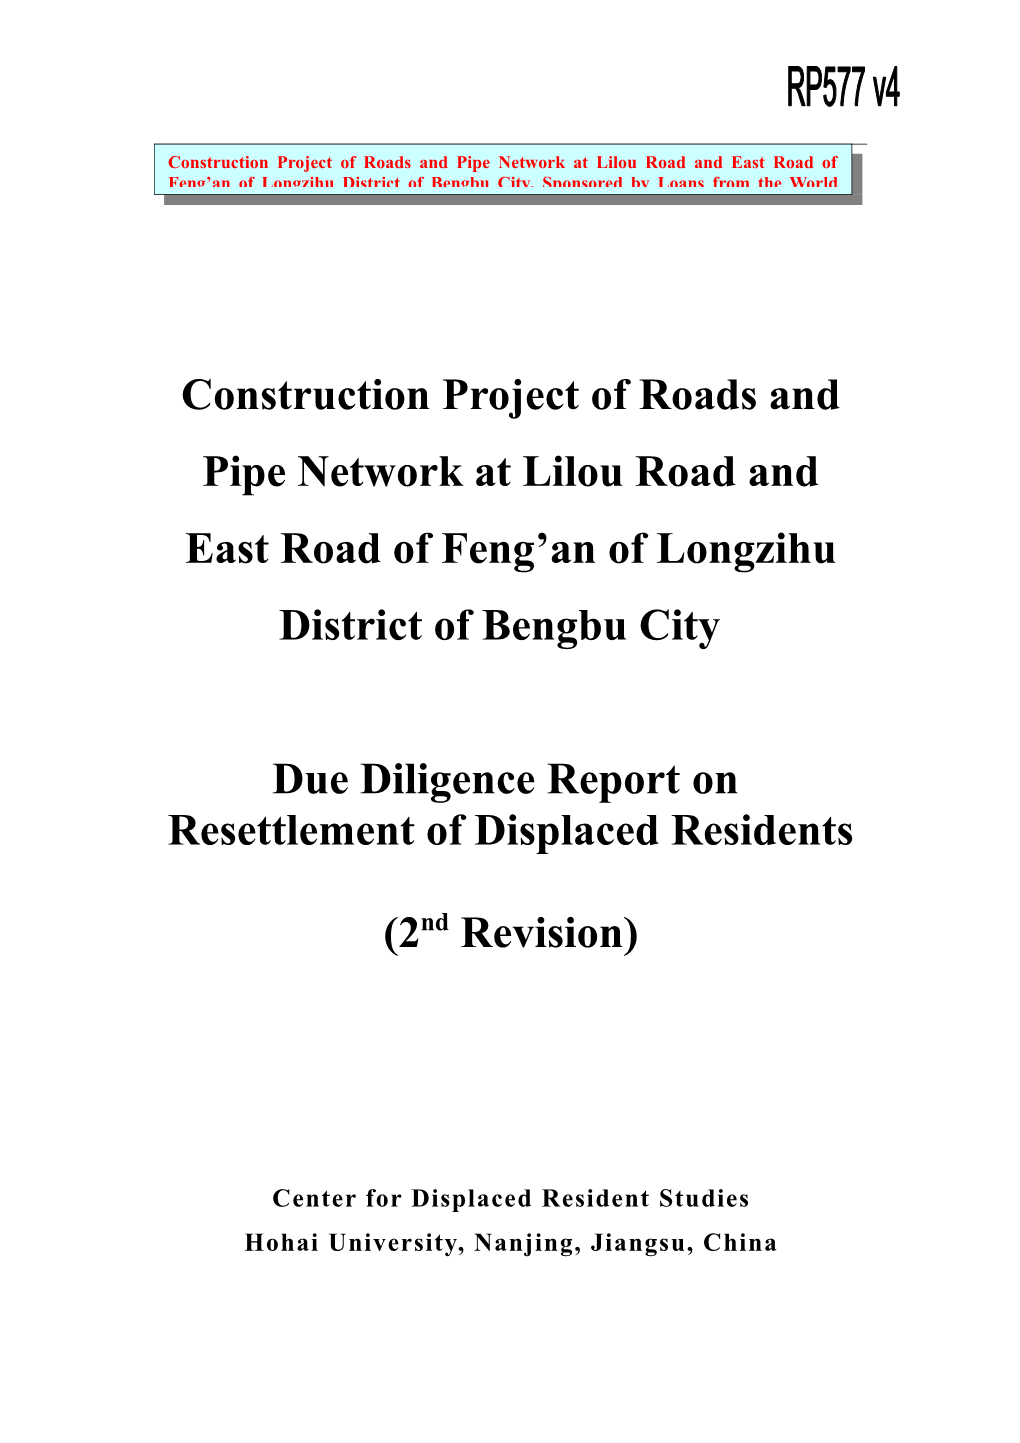 Construction Project of Roads and Pipe Network at Lilou Road and East Road of Feng An